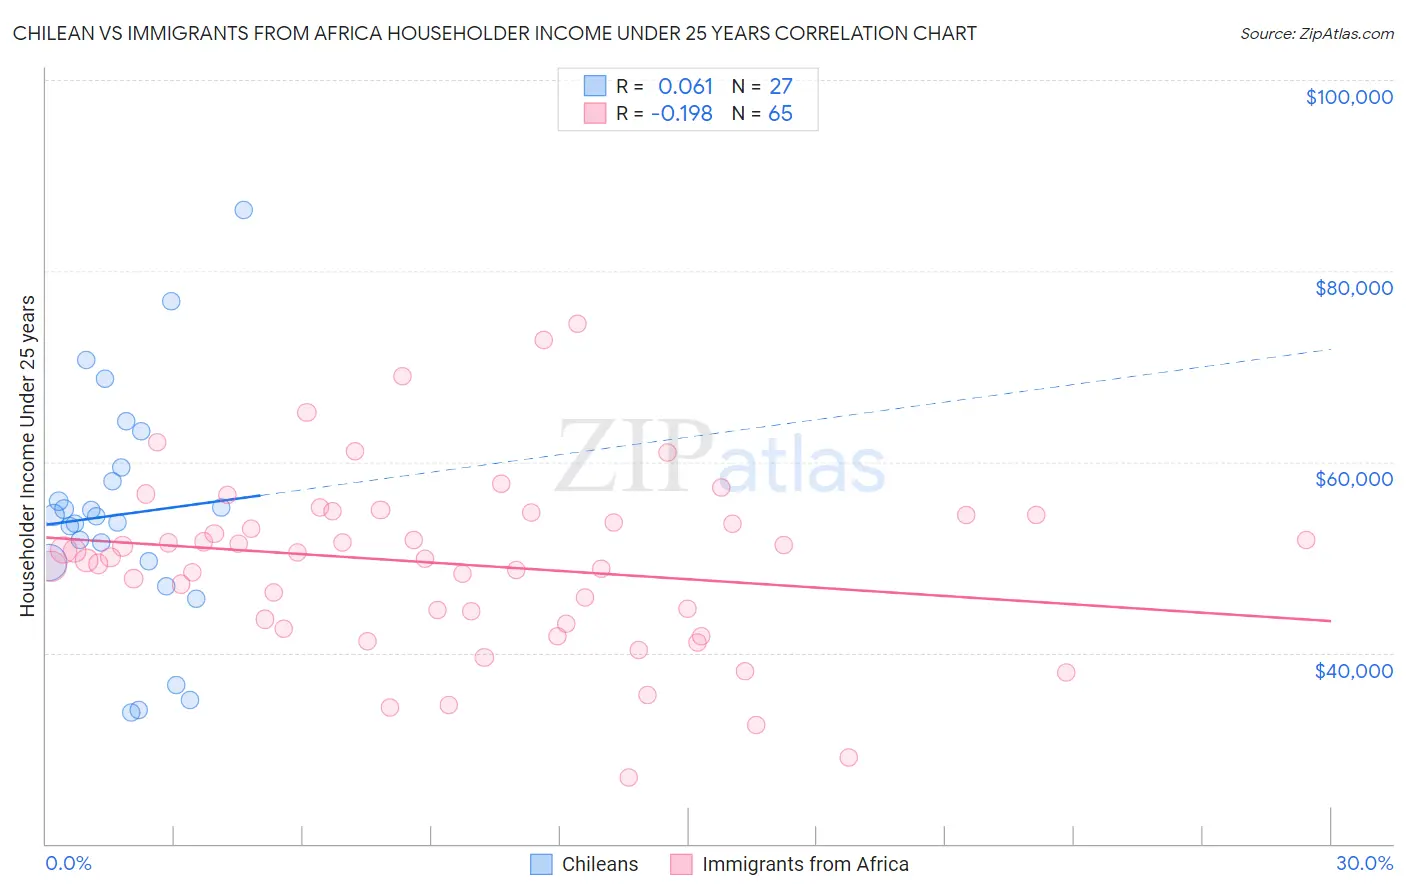 Chilean vs Immigrants from Africa Householder Income Under 25 years